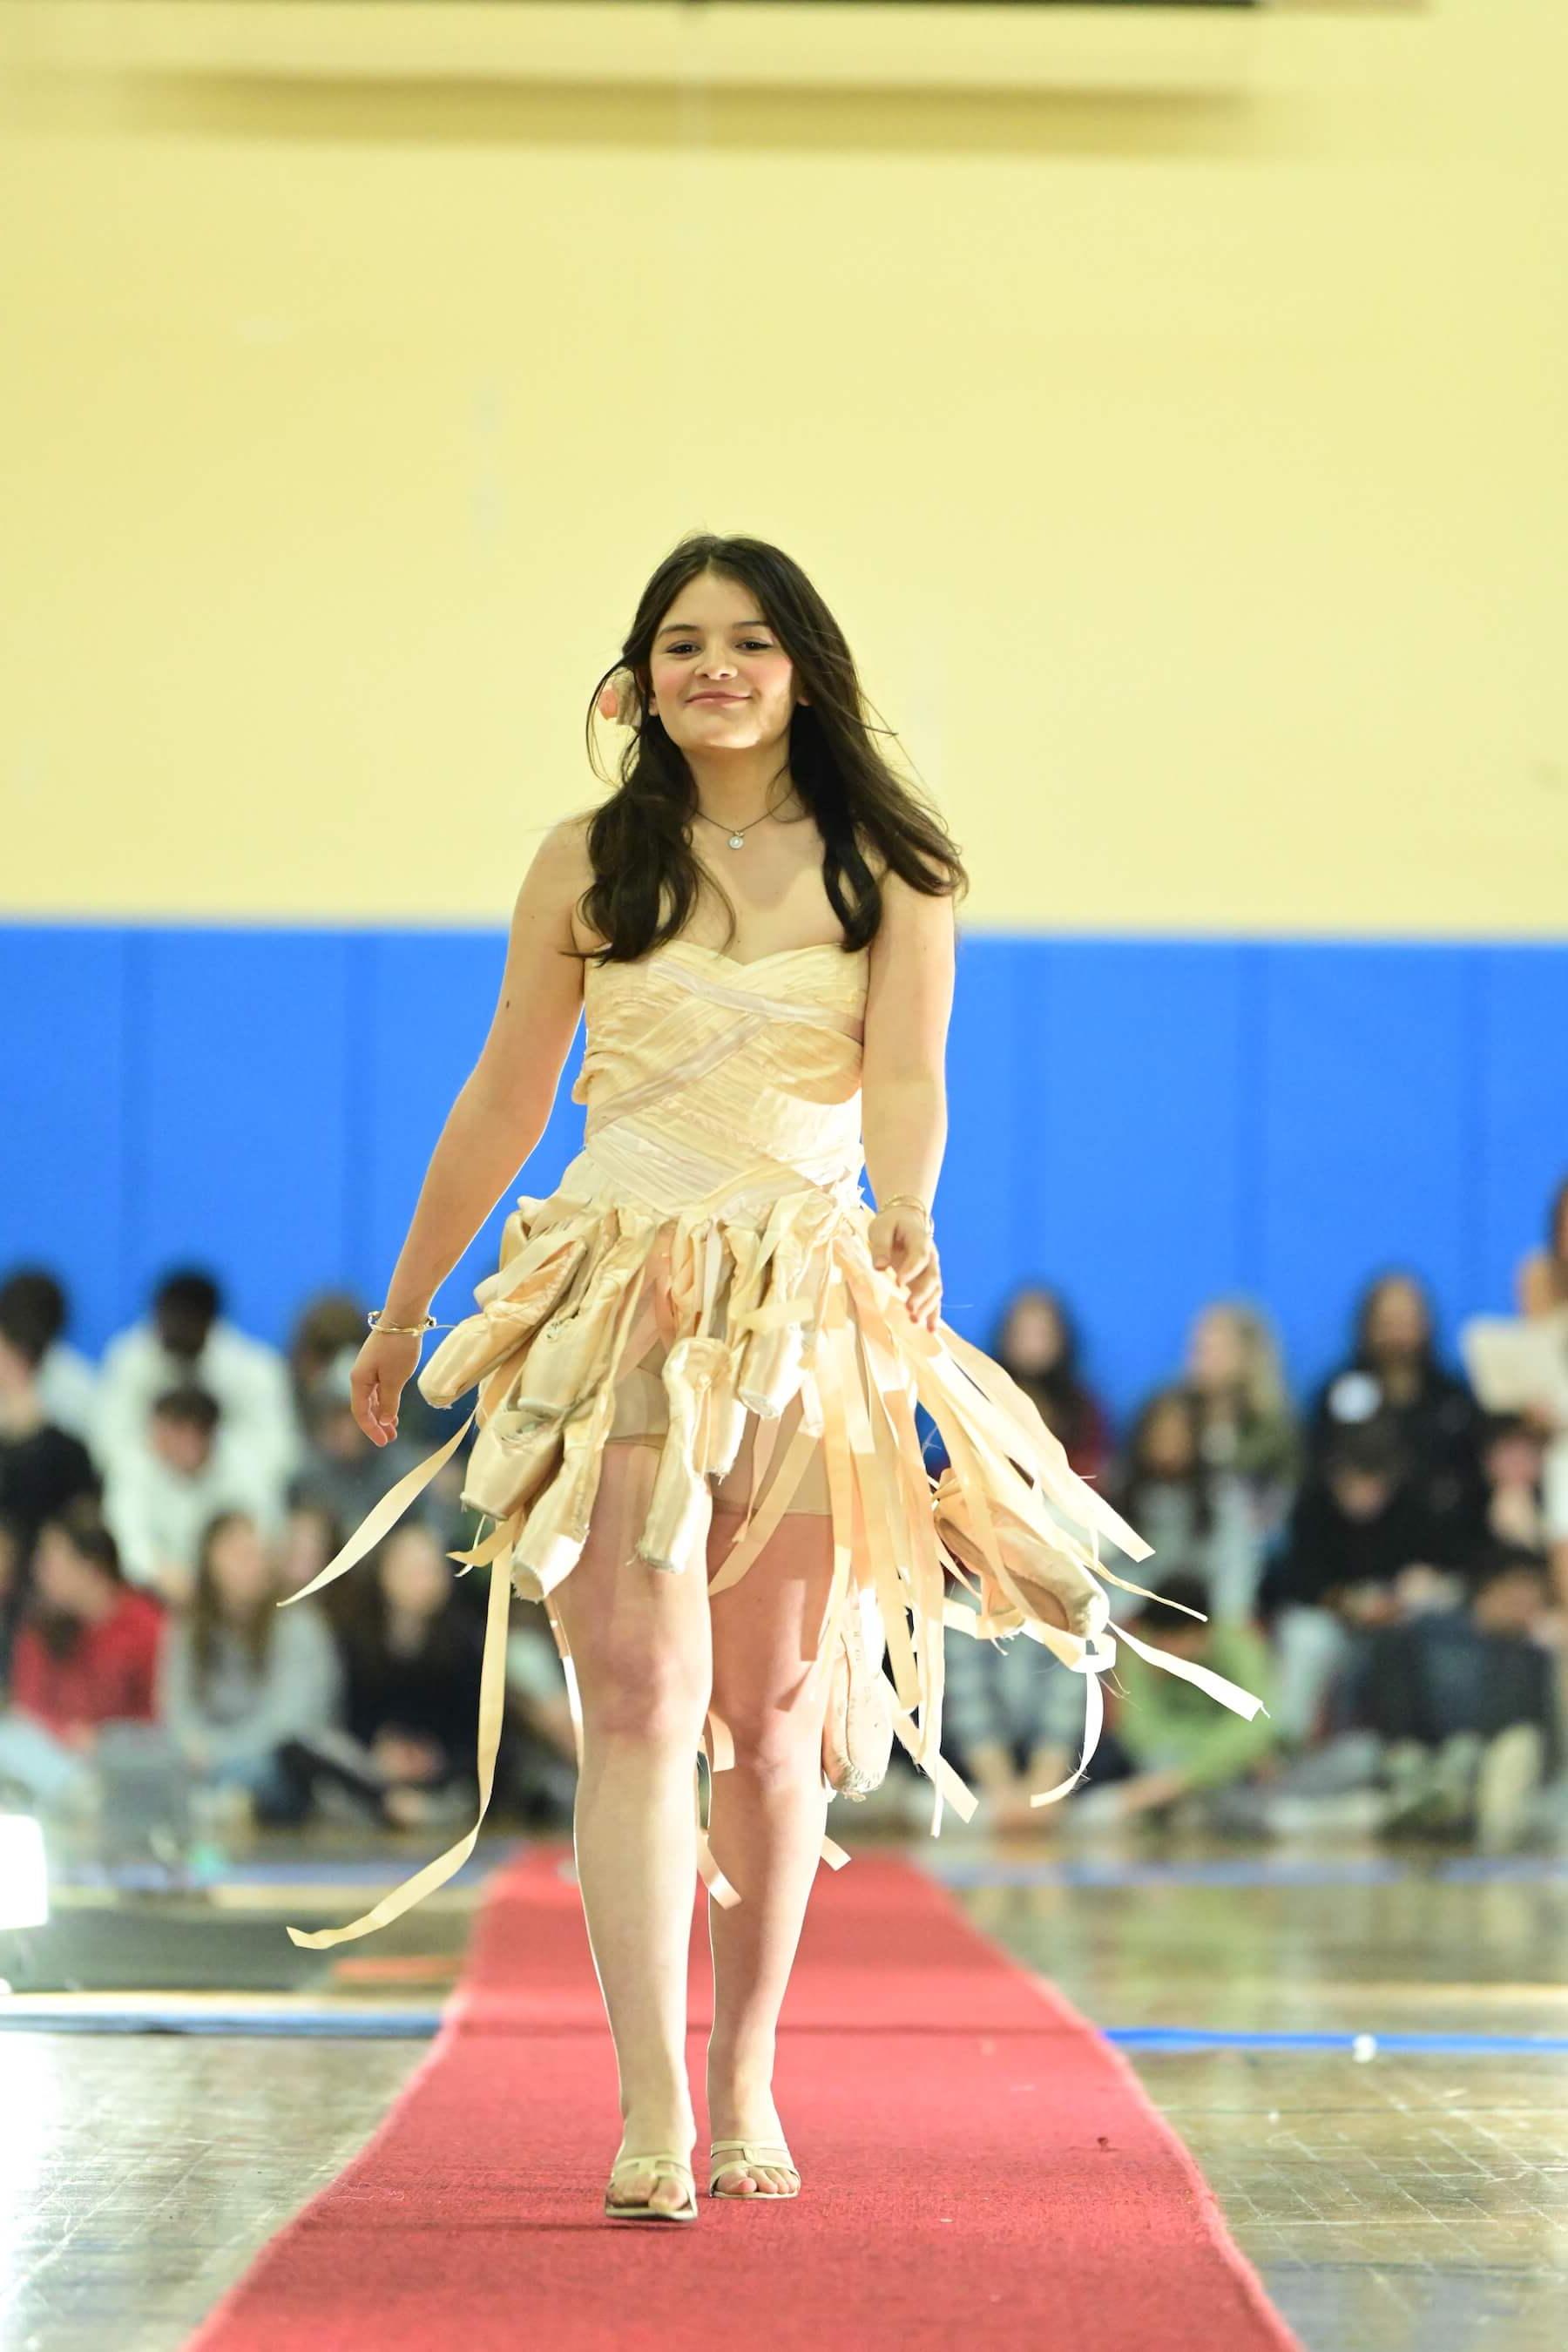 An Ethical Culture Fieldston Upper School student models at the Fashion Show.